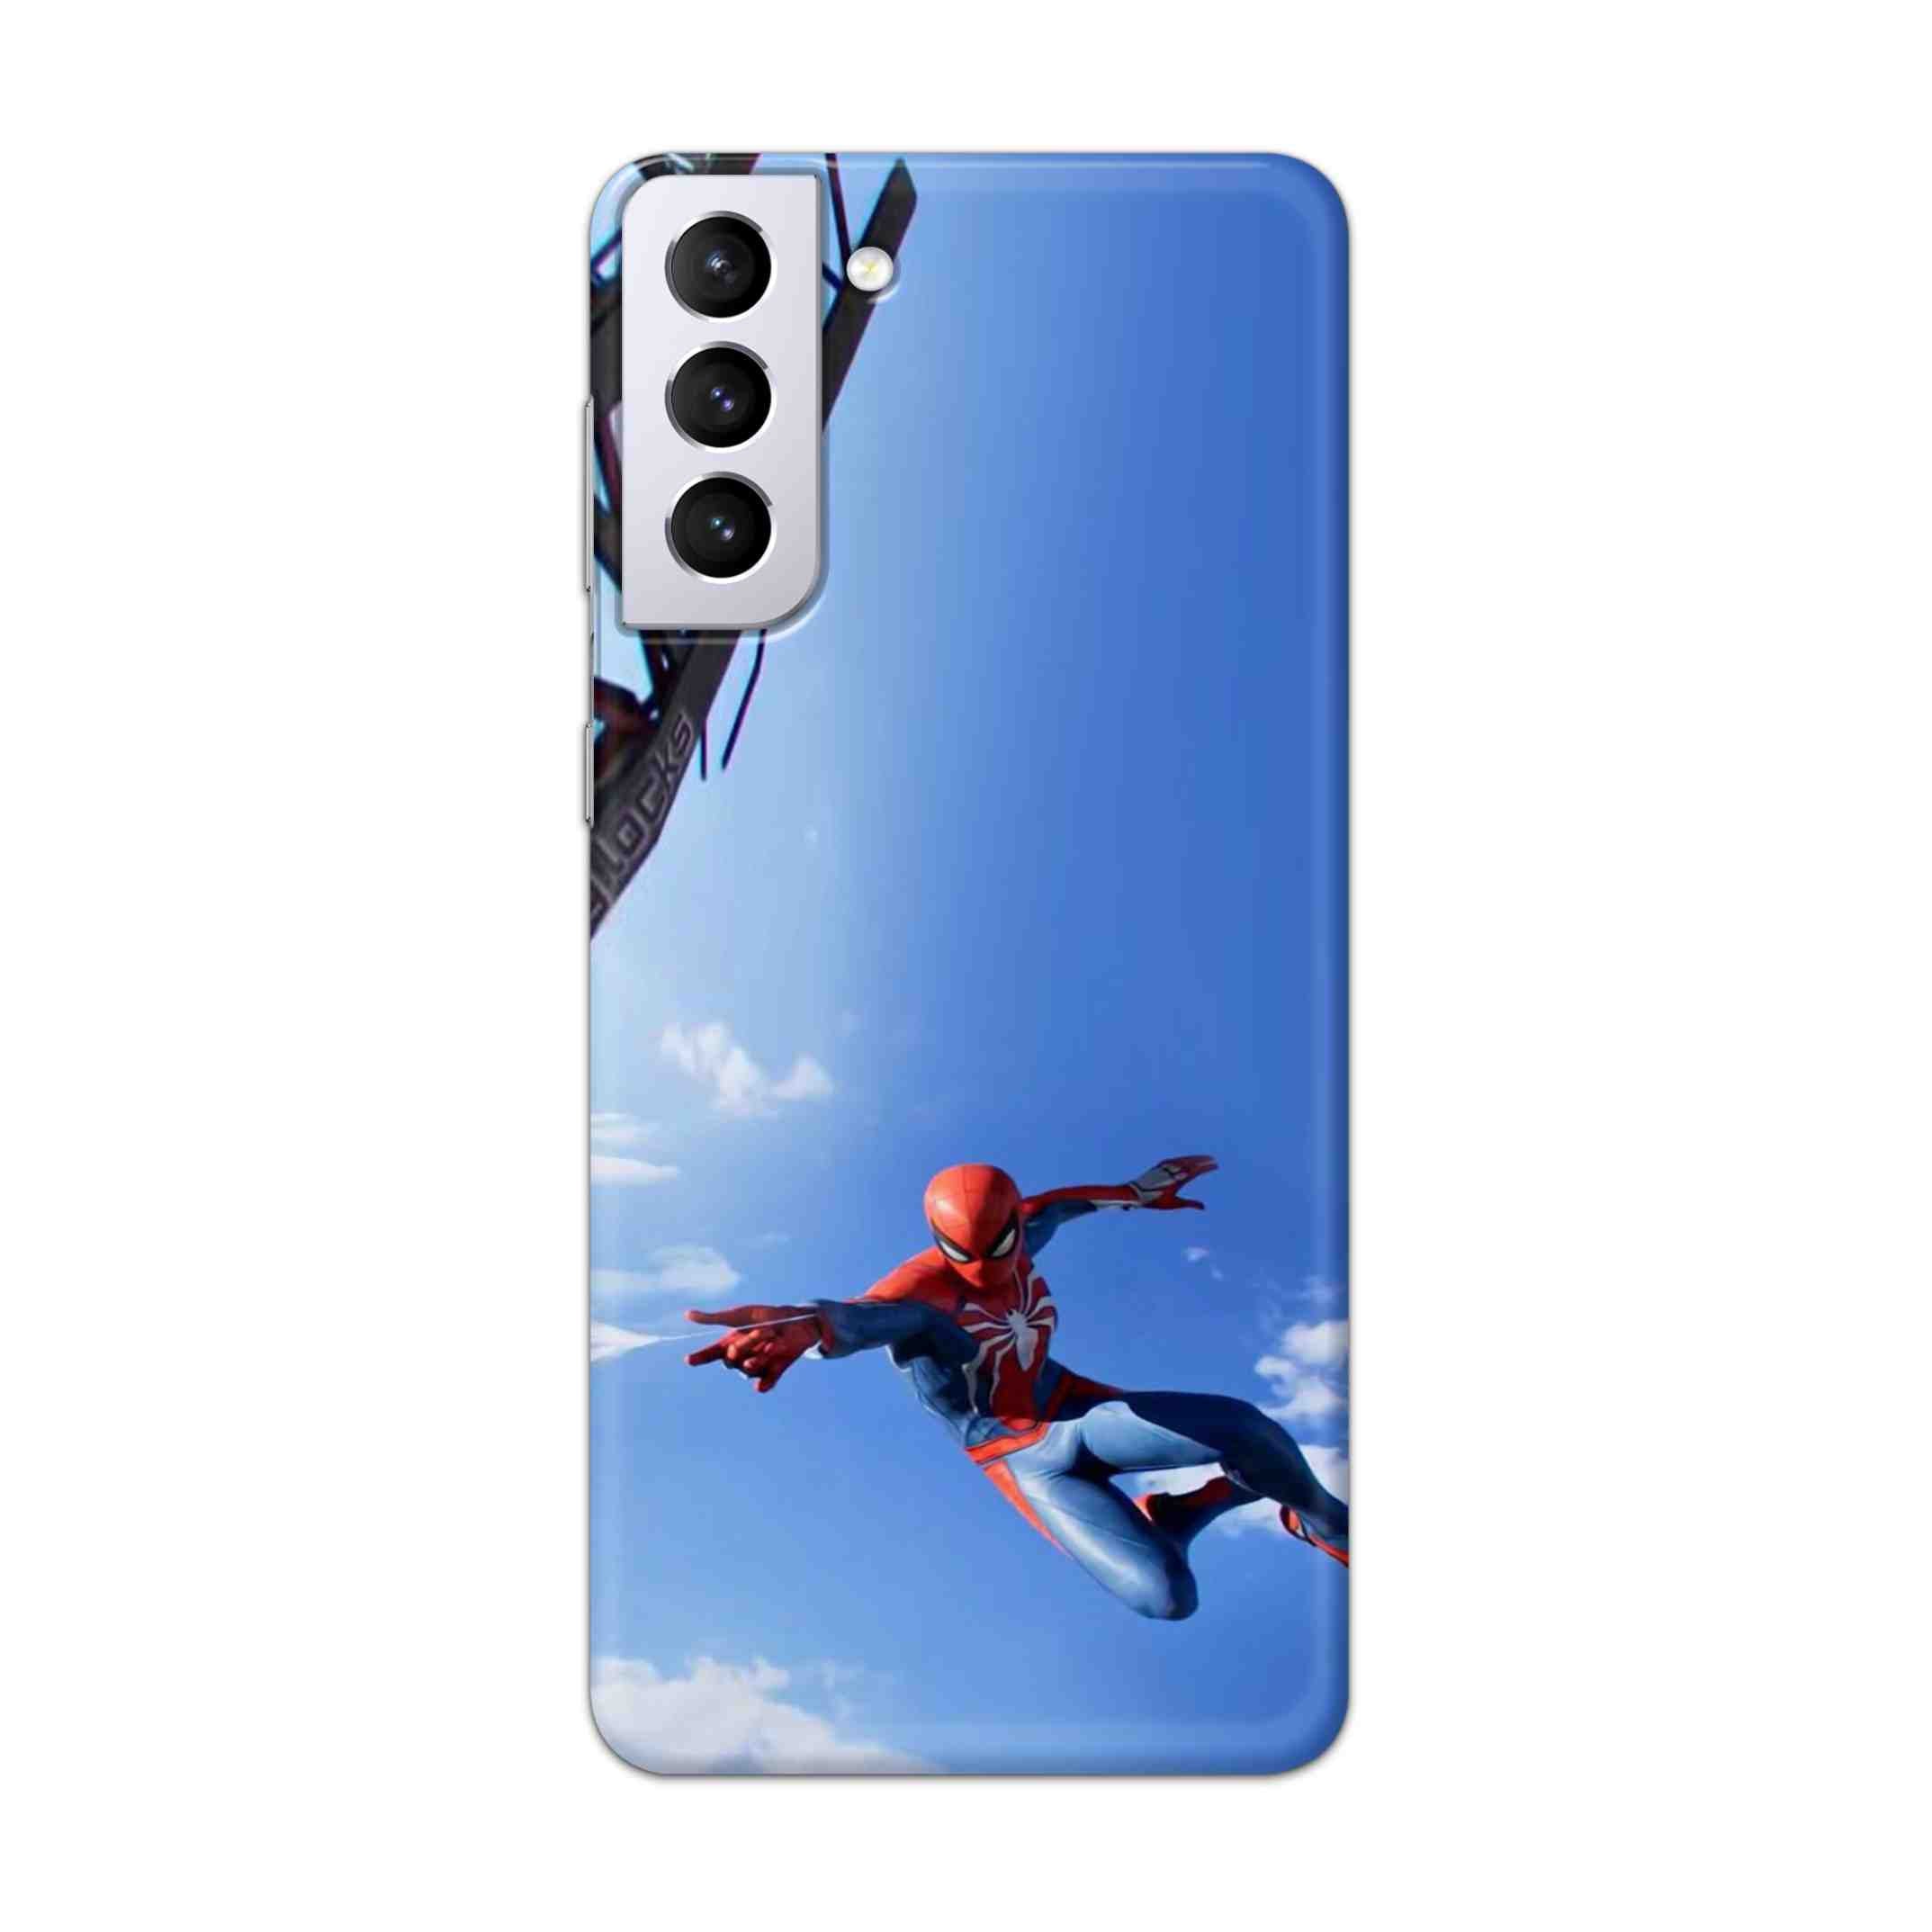 Buy Marvel Studio Spiderman Hard Back Mobile Phone Case Cover For Samsung Galaxy S21 Plus Online